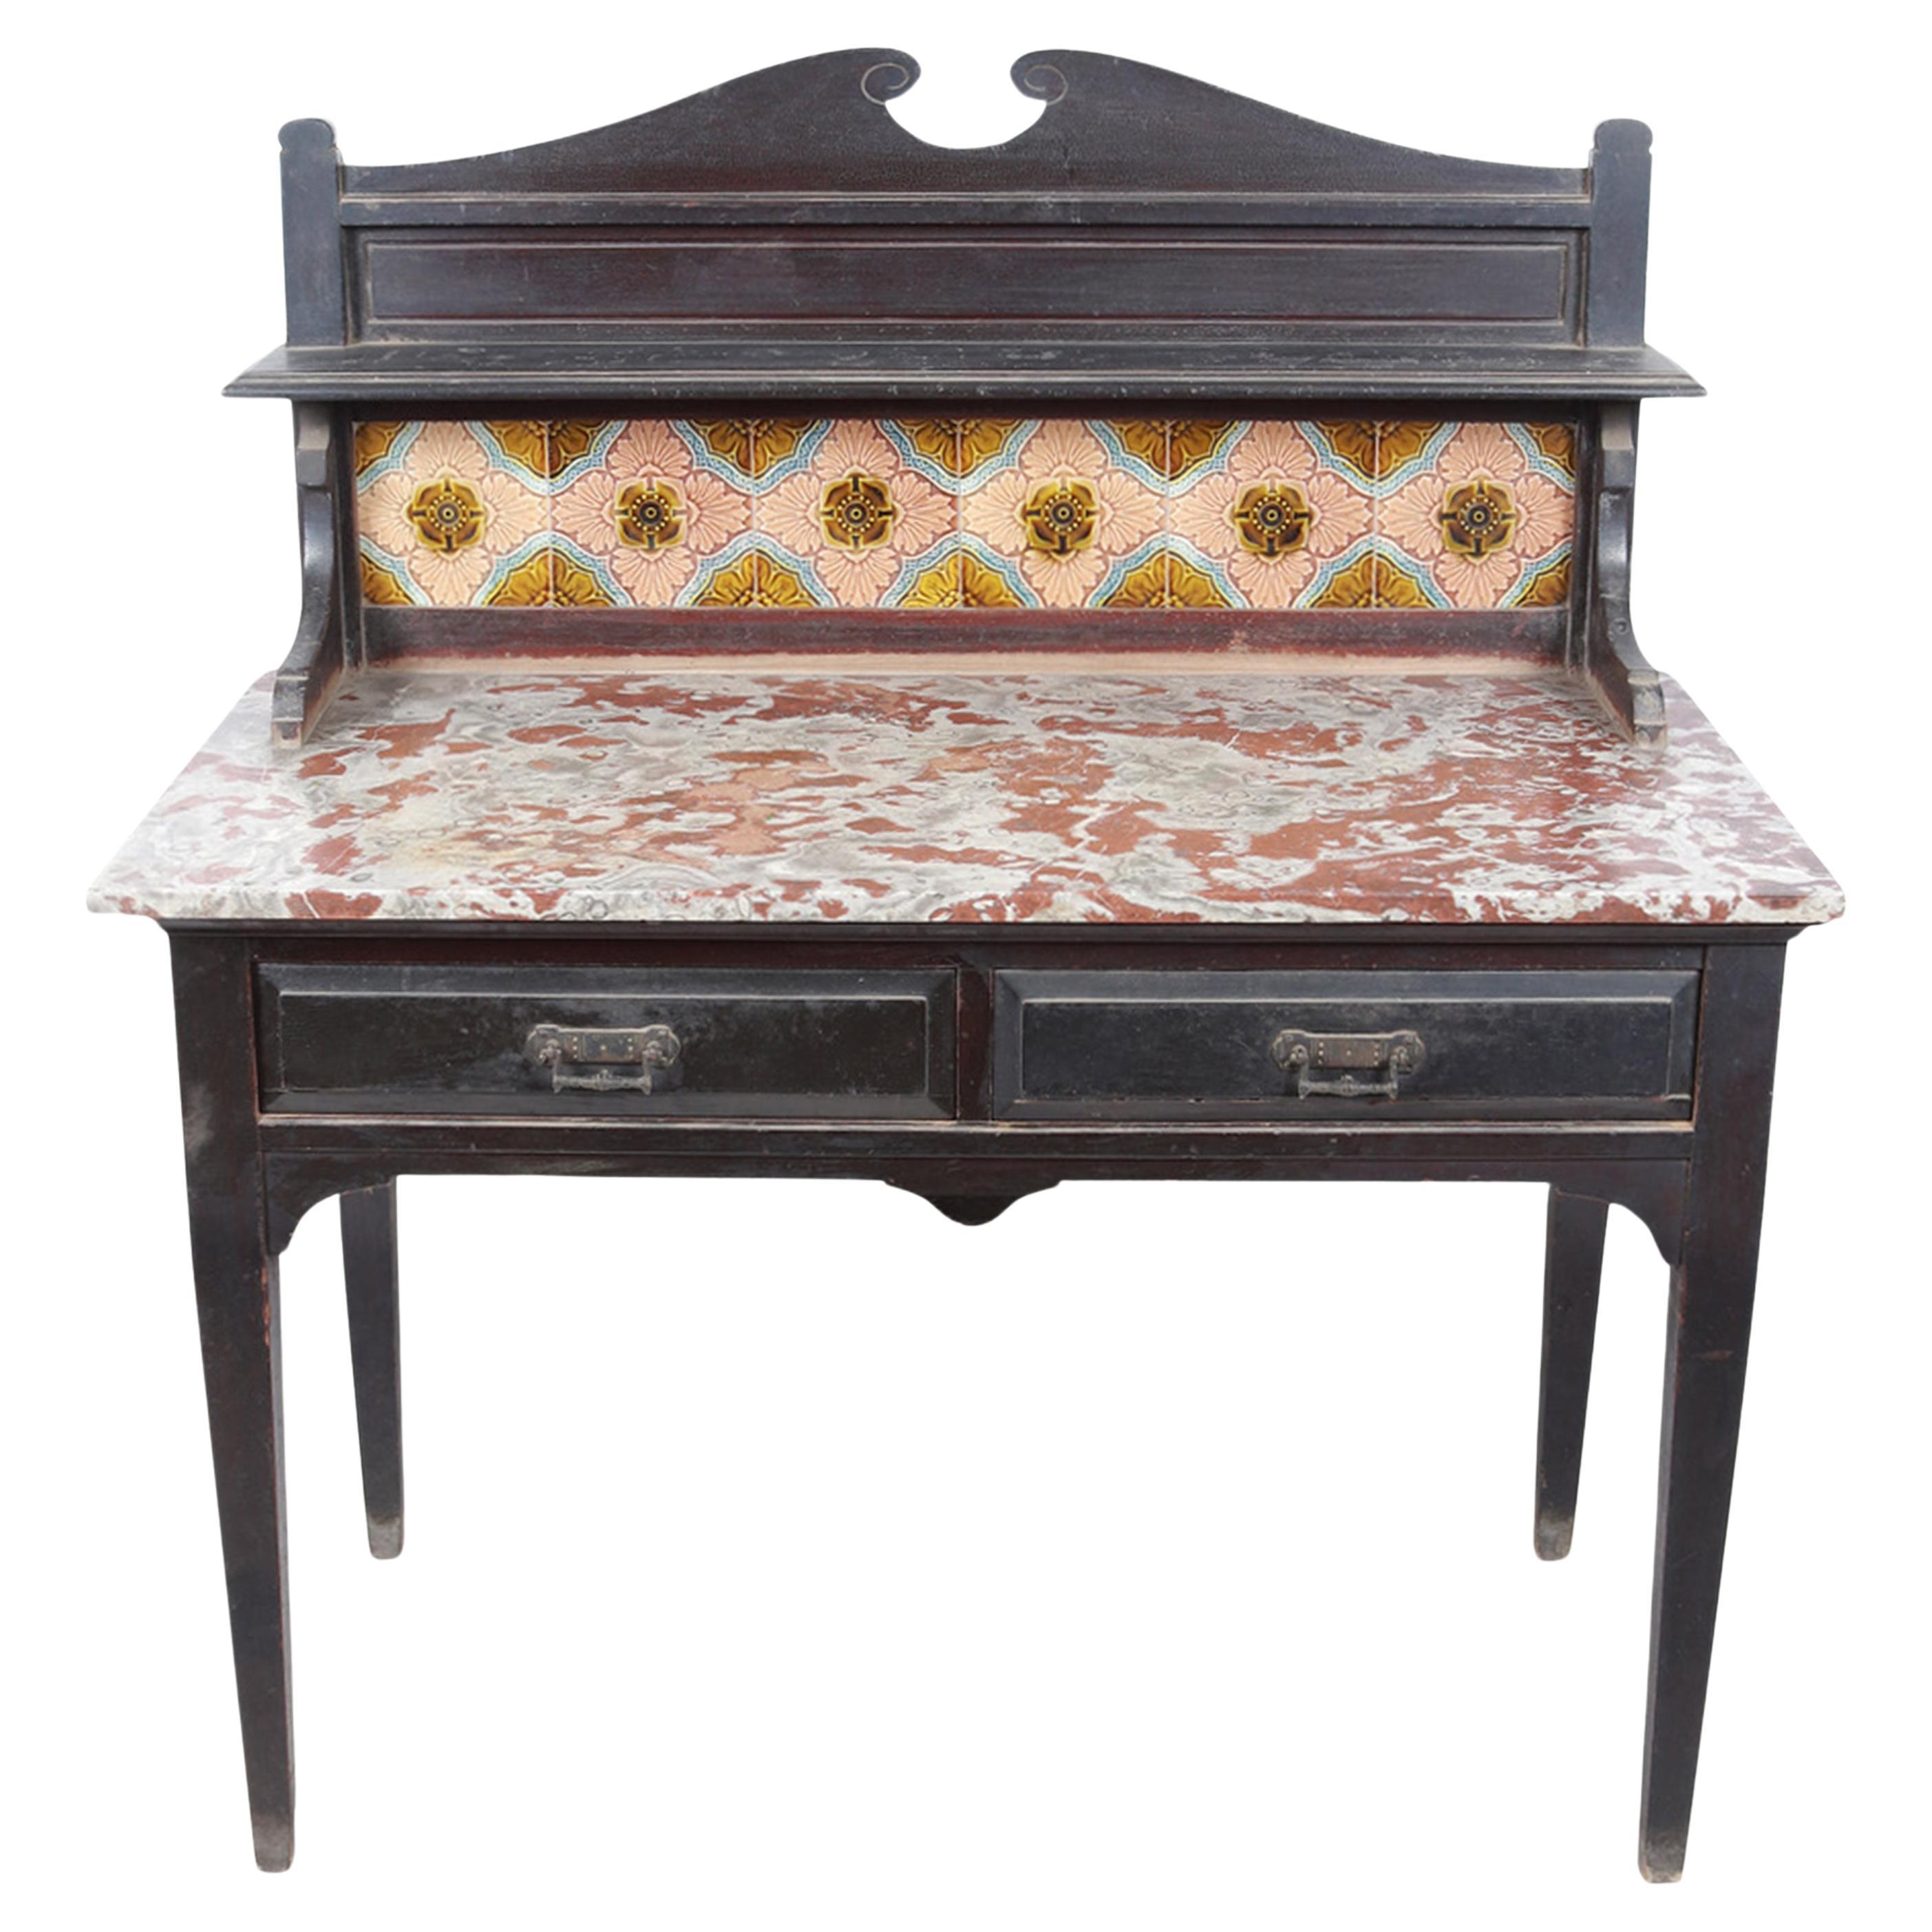 Victorian Era Marble Topped Table